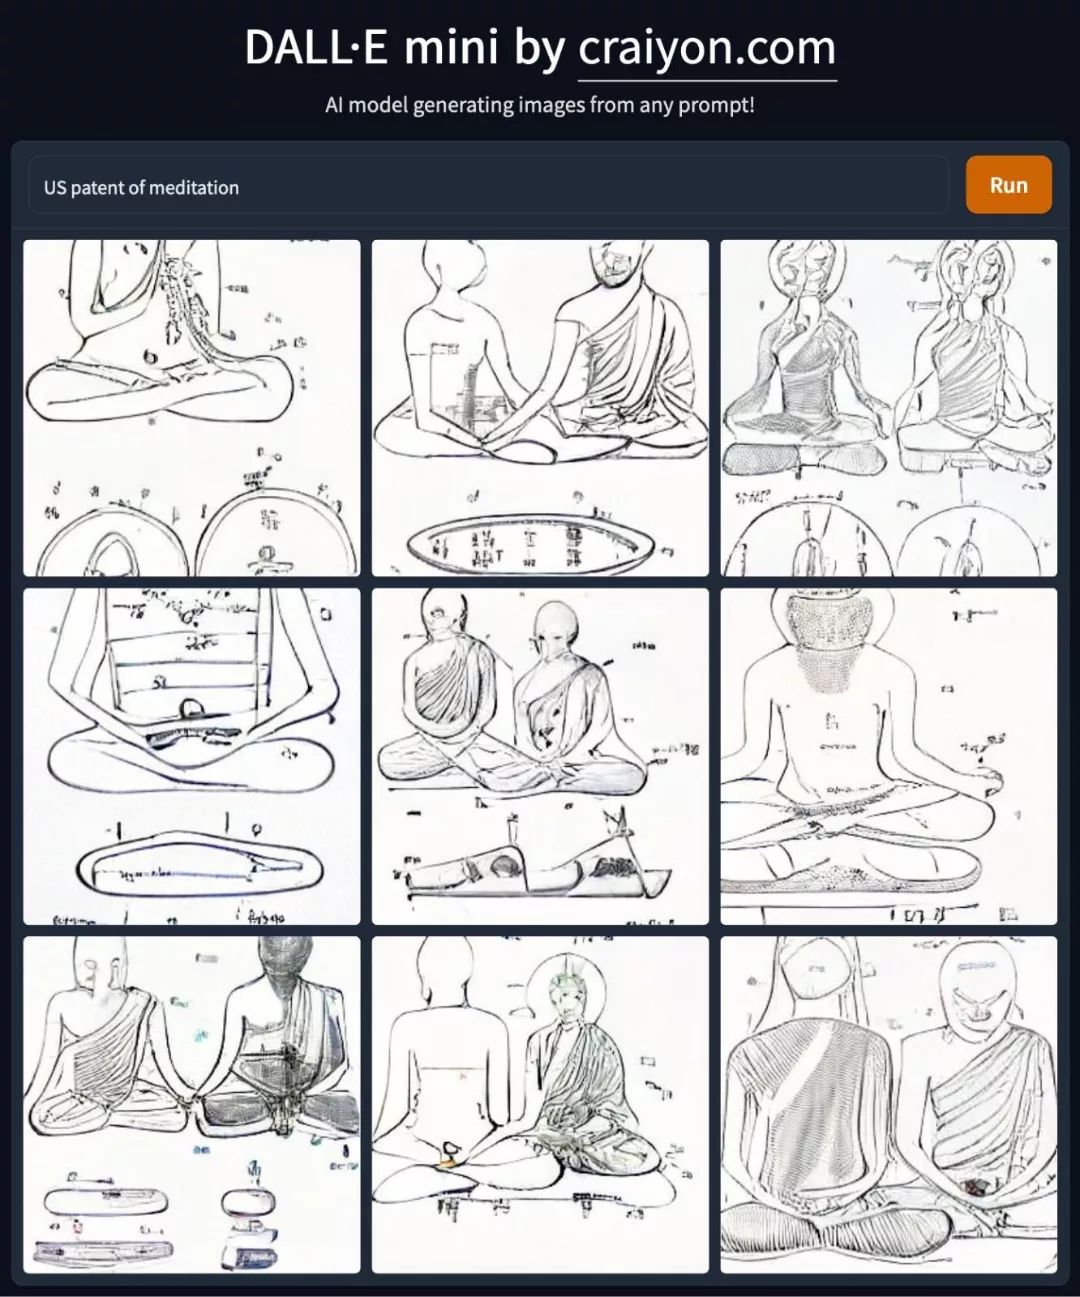 A grid of nine sketches of different meditation poses. The sketches are in black and white and have a hand-drawn style. The sketches show a person meditating with different props, such as a cushion, a mat, and a blanket. The sketches are labeled with numbers and letters, such as “1A”, “2B”, and “3C”. The image has a title that says says “US patent of meditation”.